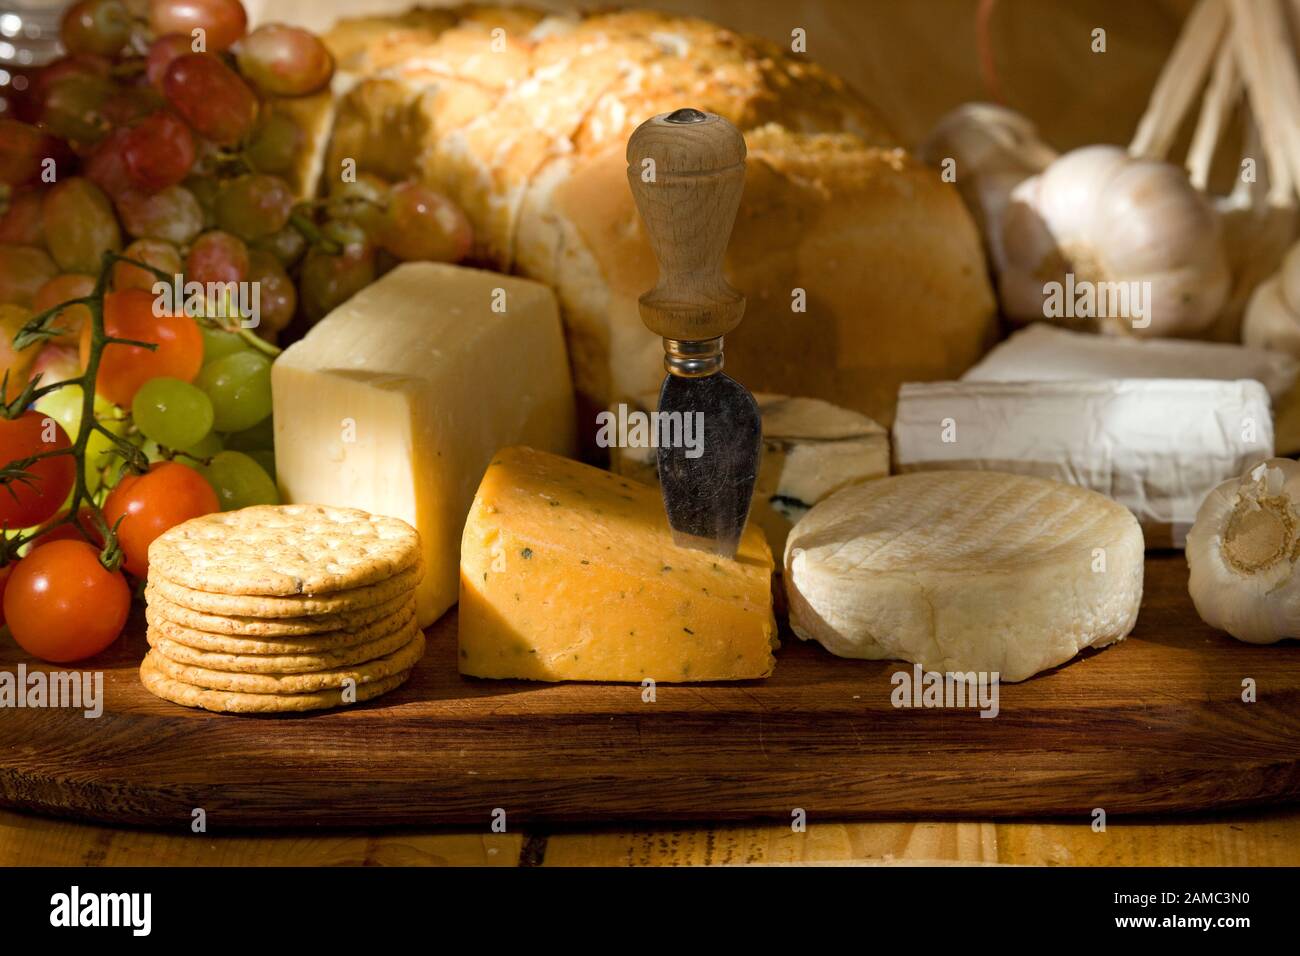 Selection of cheeses, bread, fruits and vegetables Stock Photo